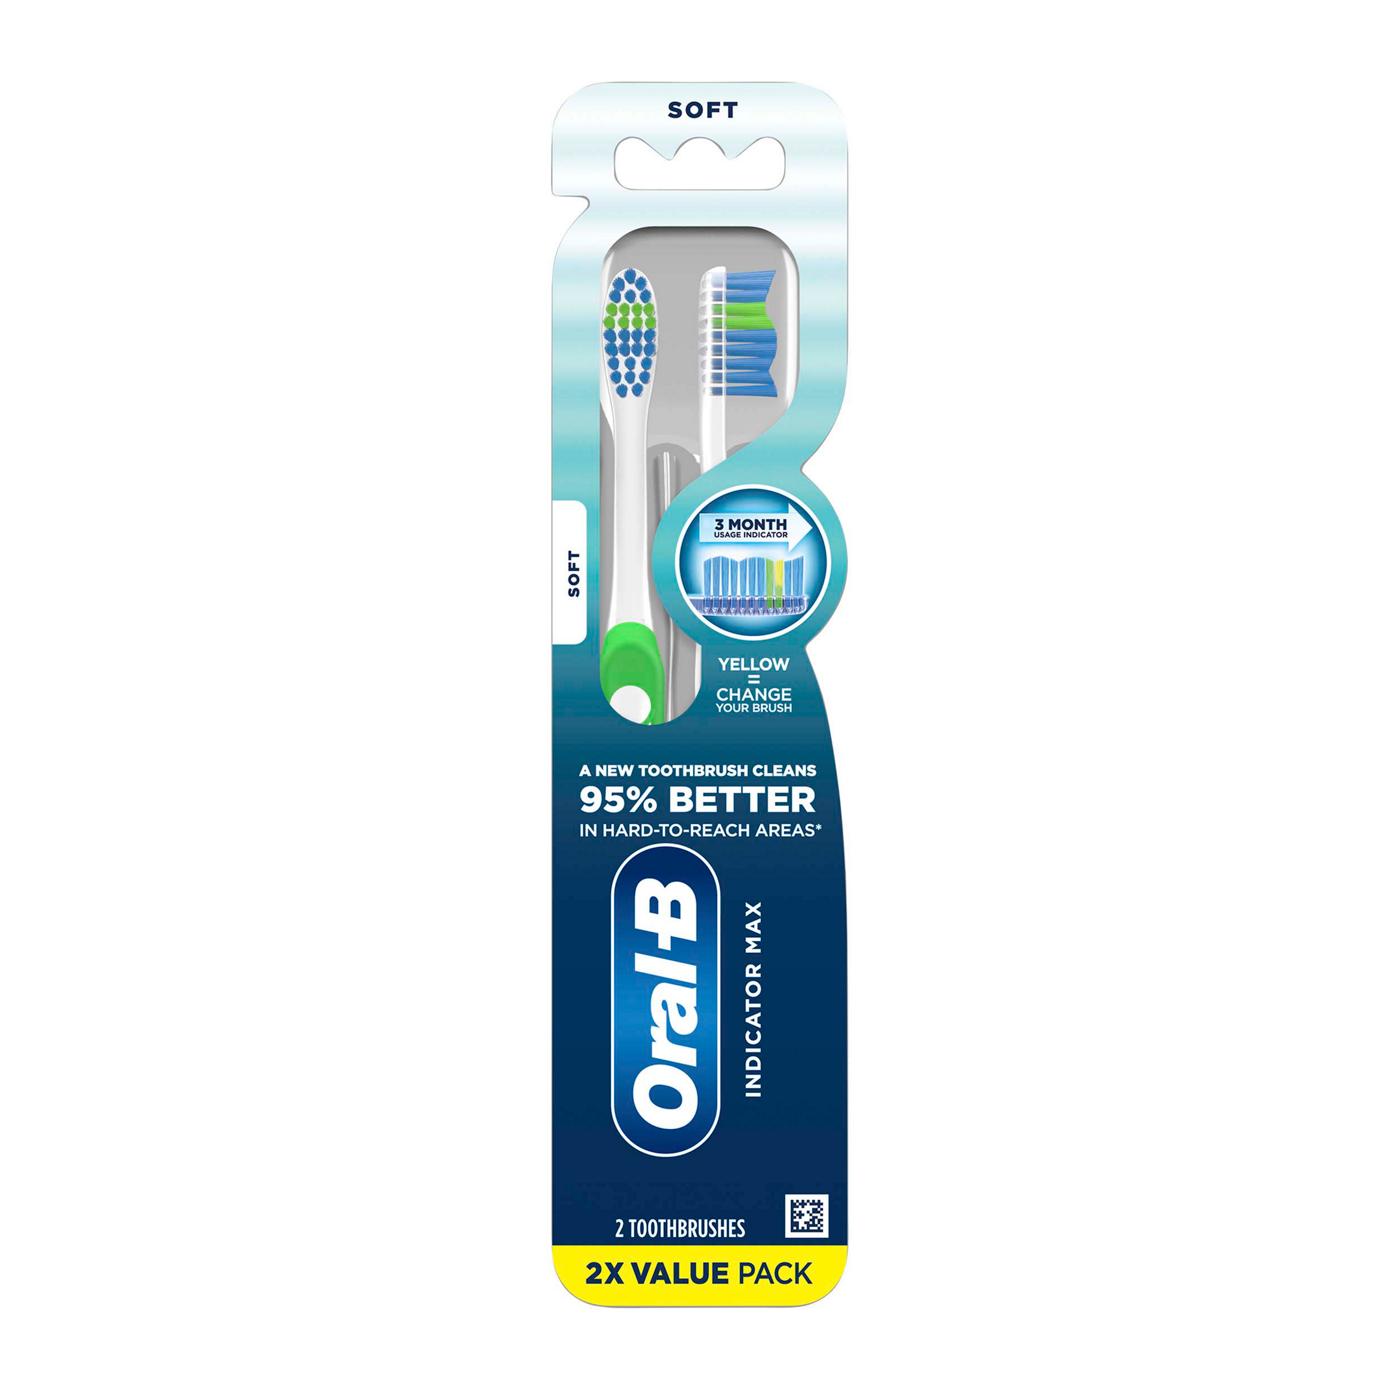 Oral-B Indicator Max Soft Toothbrushes; image 1 of 7